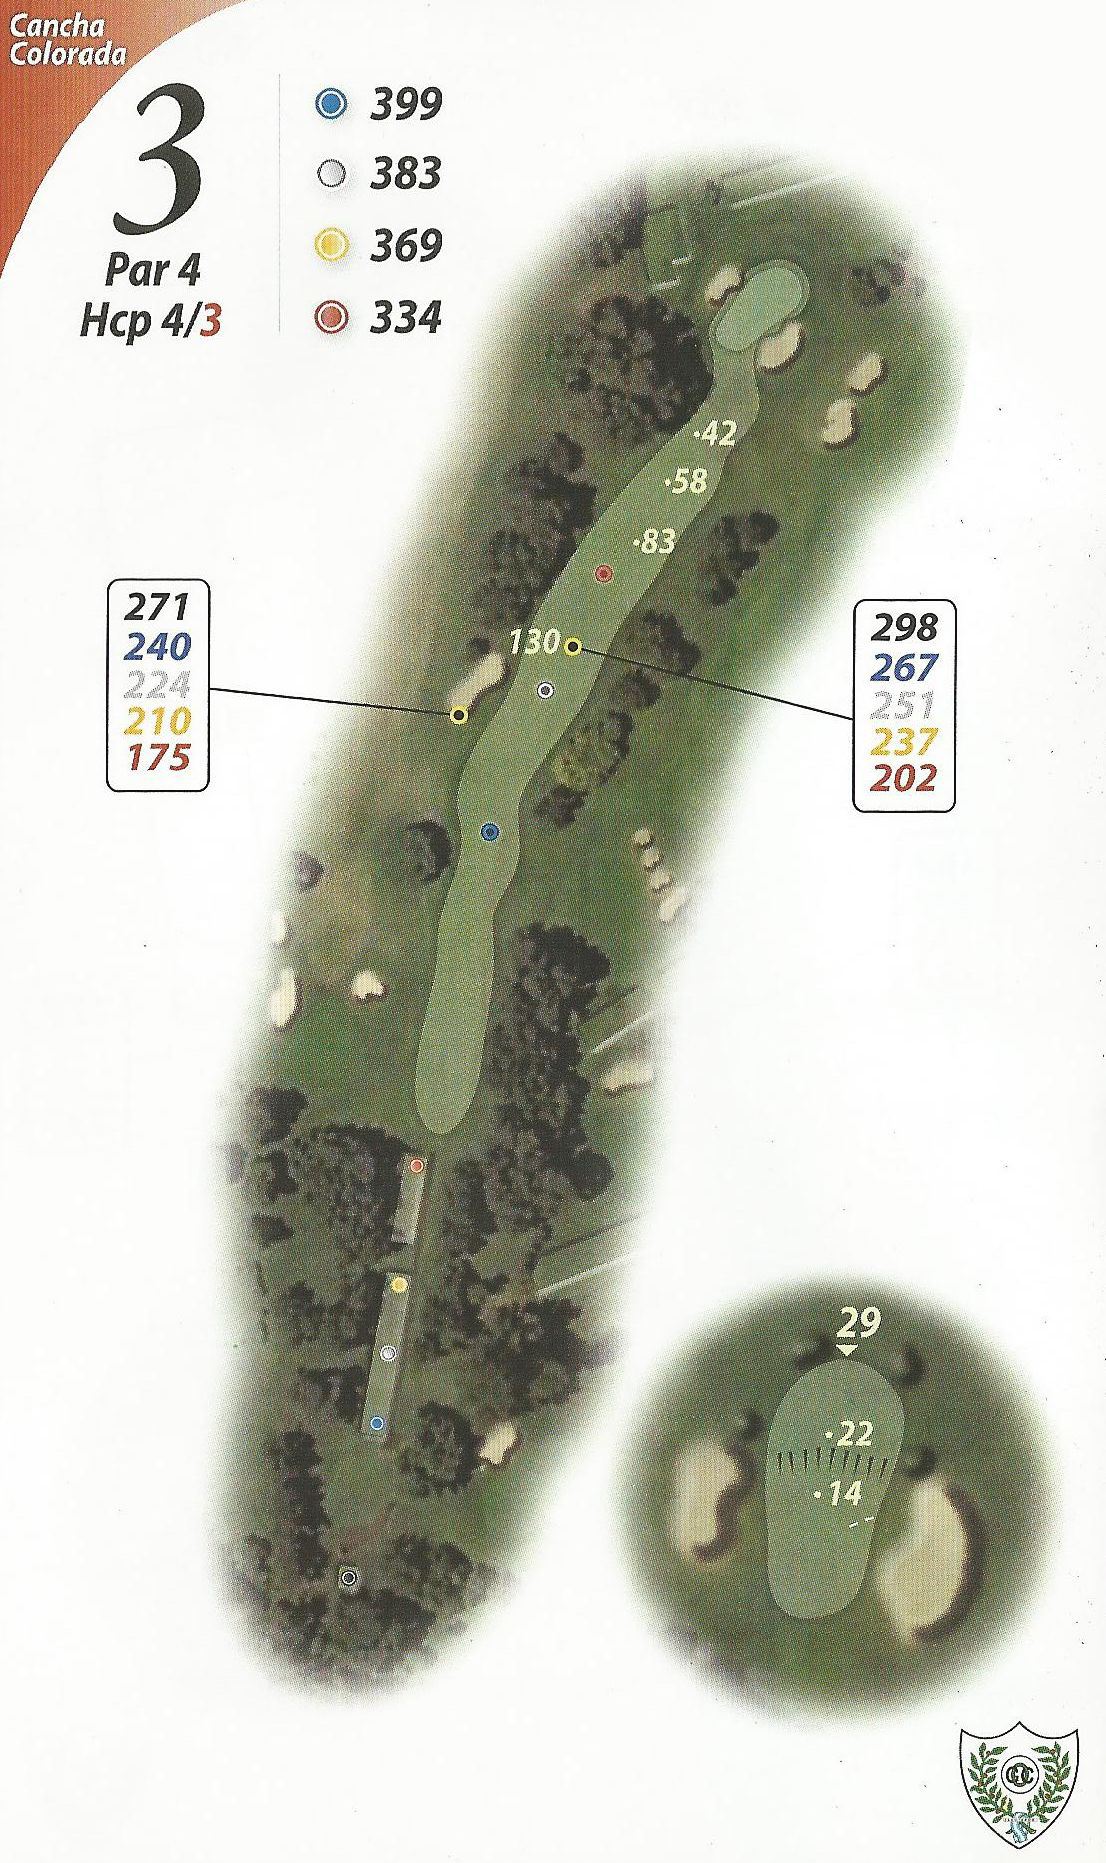 Hole 3 (red)